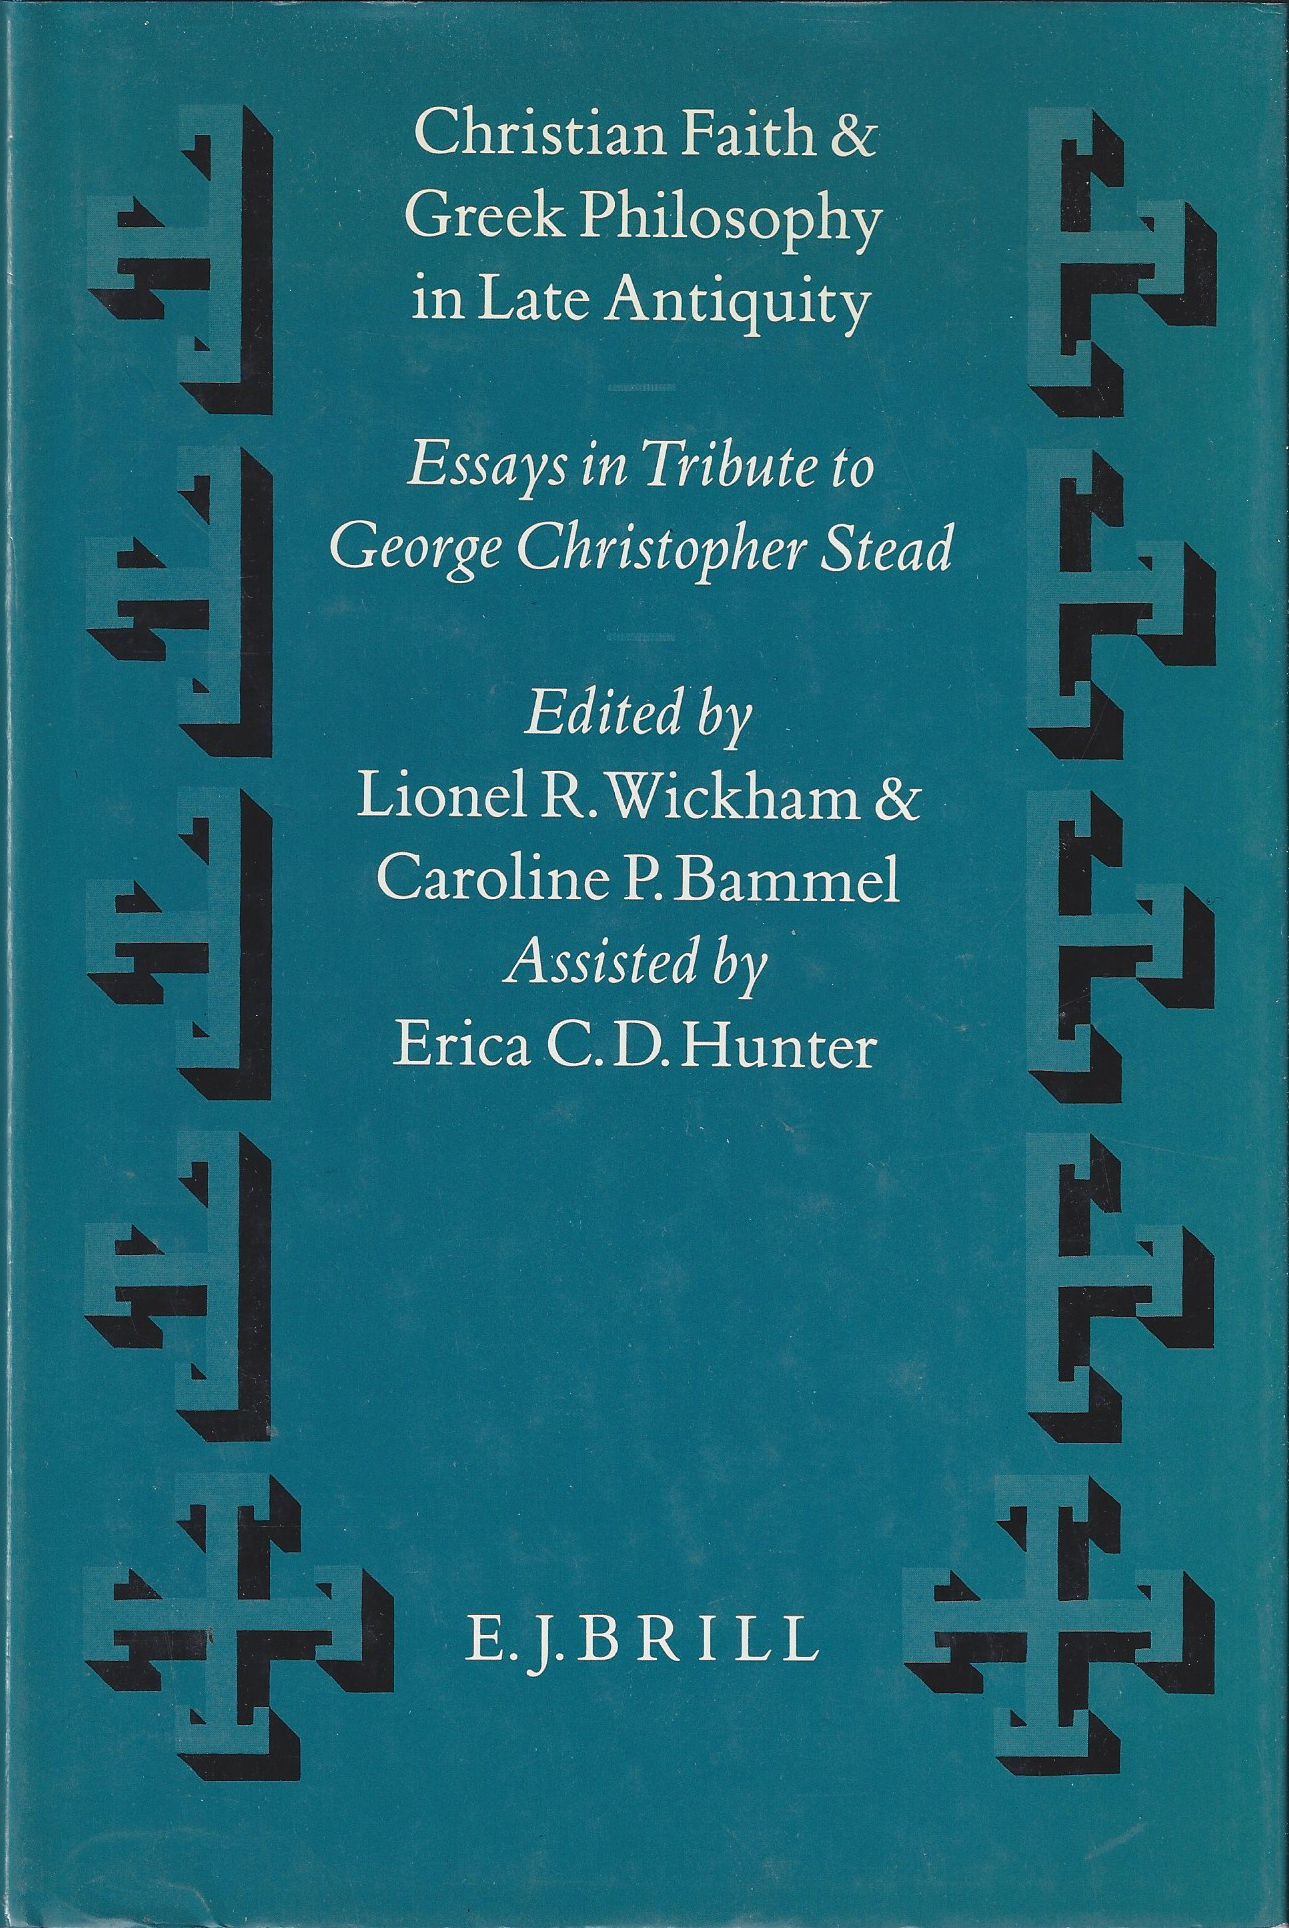 Christian Faith and Greek Philosophy in Late Antiquity: Essays in Tribute to George Christopher Stead : In Celebration of His Eightieth Birthday 9th - Wickham, Lionel R.; Bammel, Caroline P.; Hunter, Erica C.D.